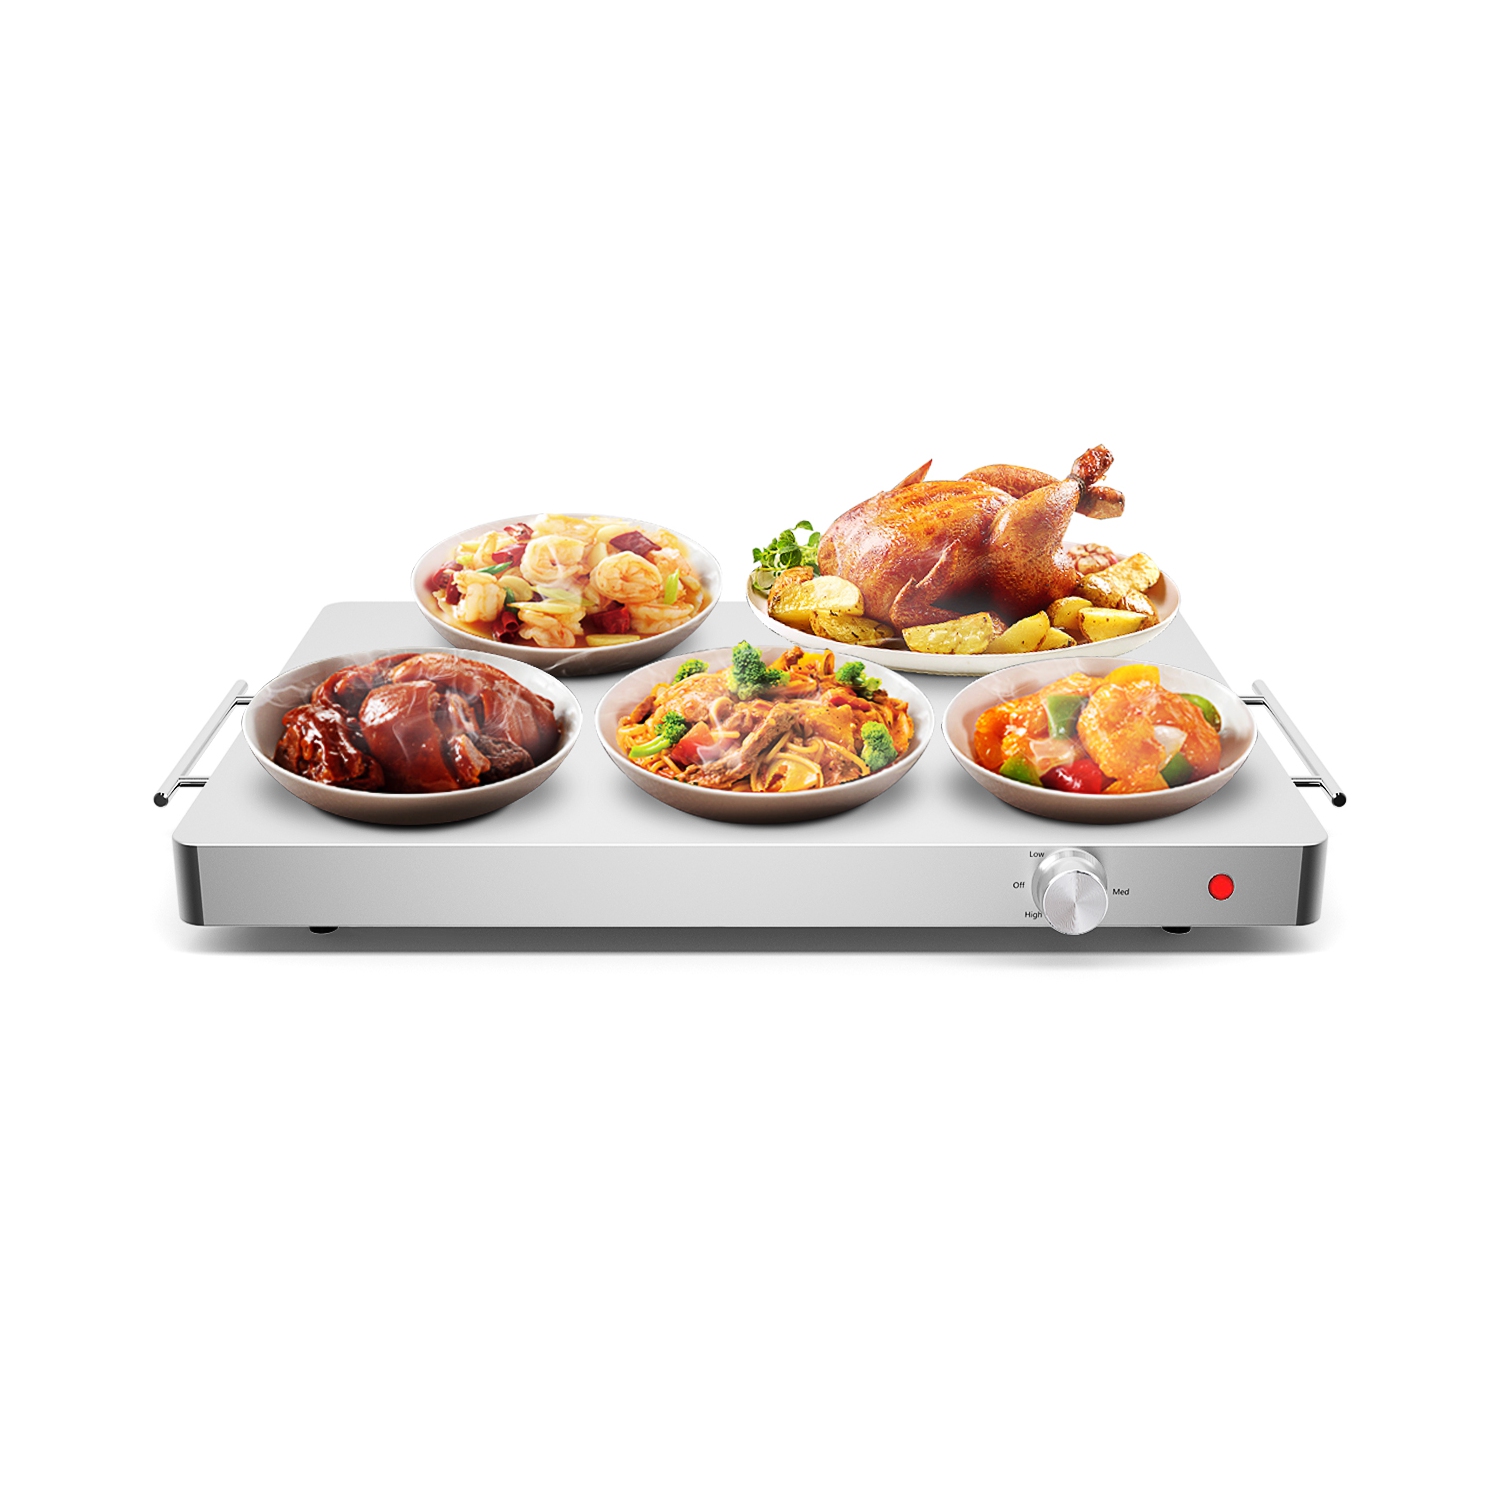 3 Tray Buffet Server  Hot Plate Food WarmerTabletop Electric Food Warming 